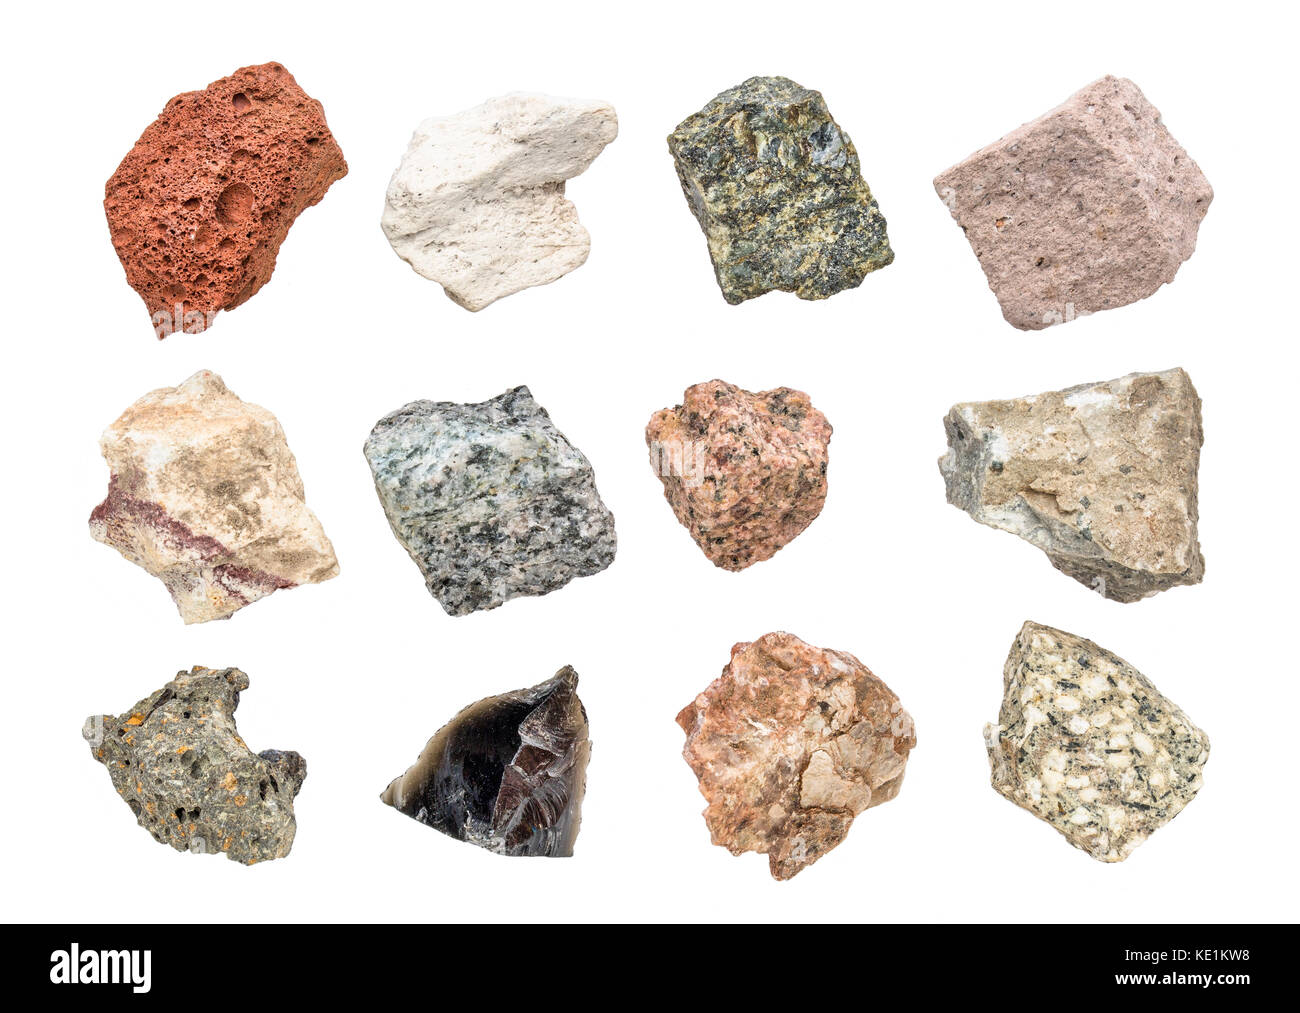 isolated igneous rock geology collection including from top left: scoria, pumice, gabbro, tuff, rhyolite, diorite, granite, andesite, basalt, obsidian Stock Photo